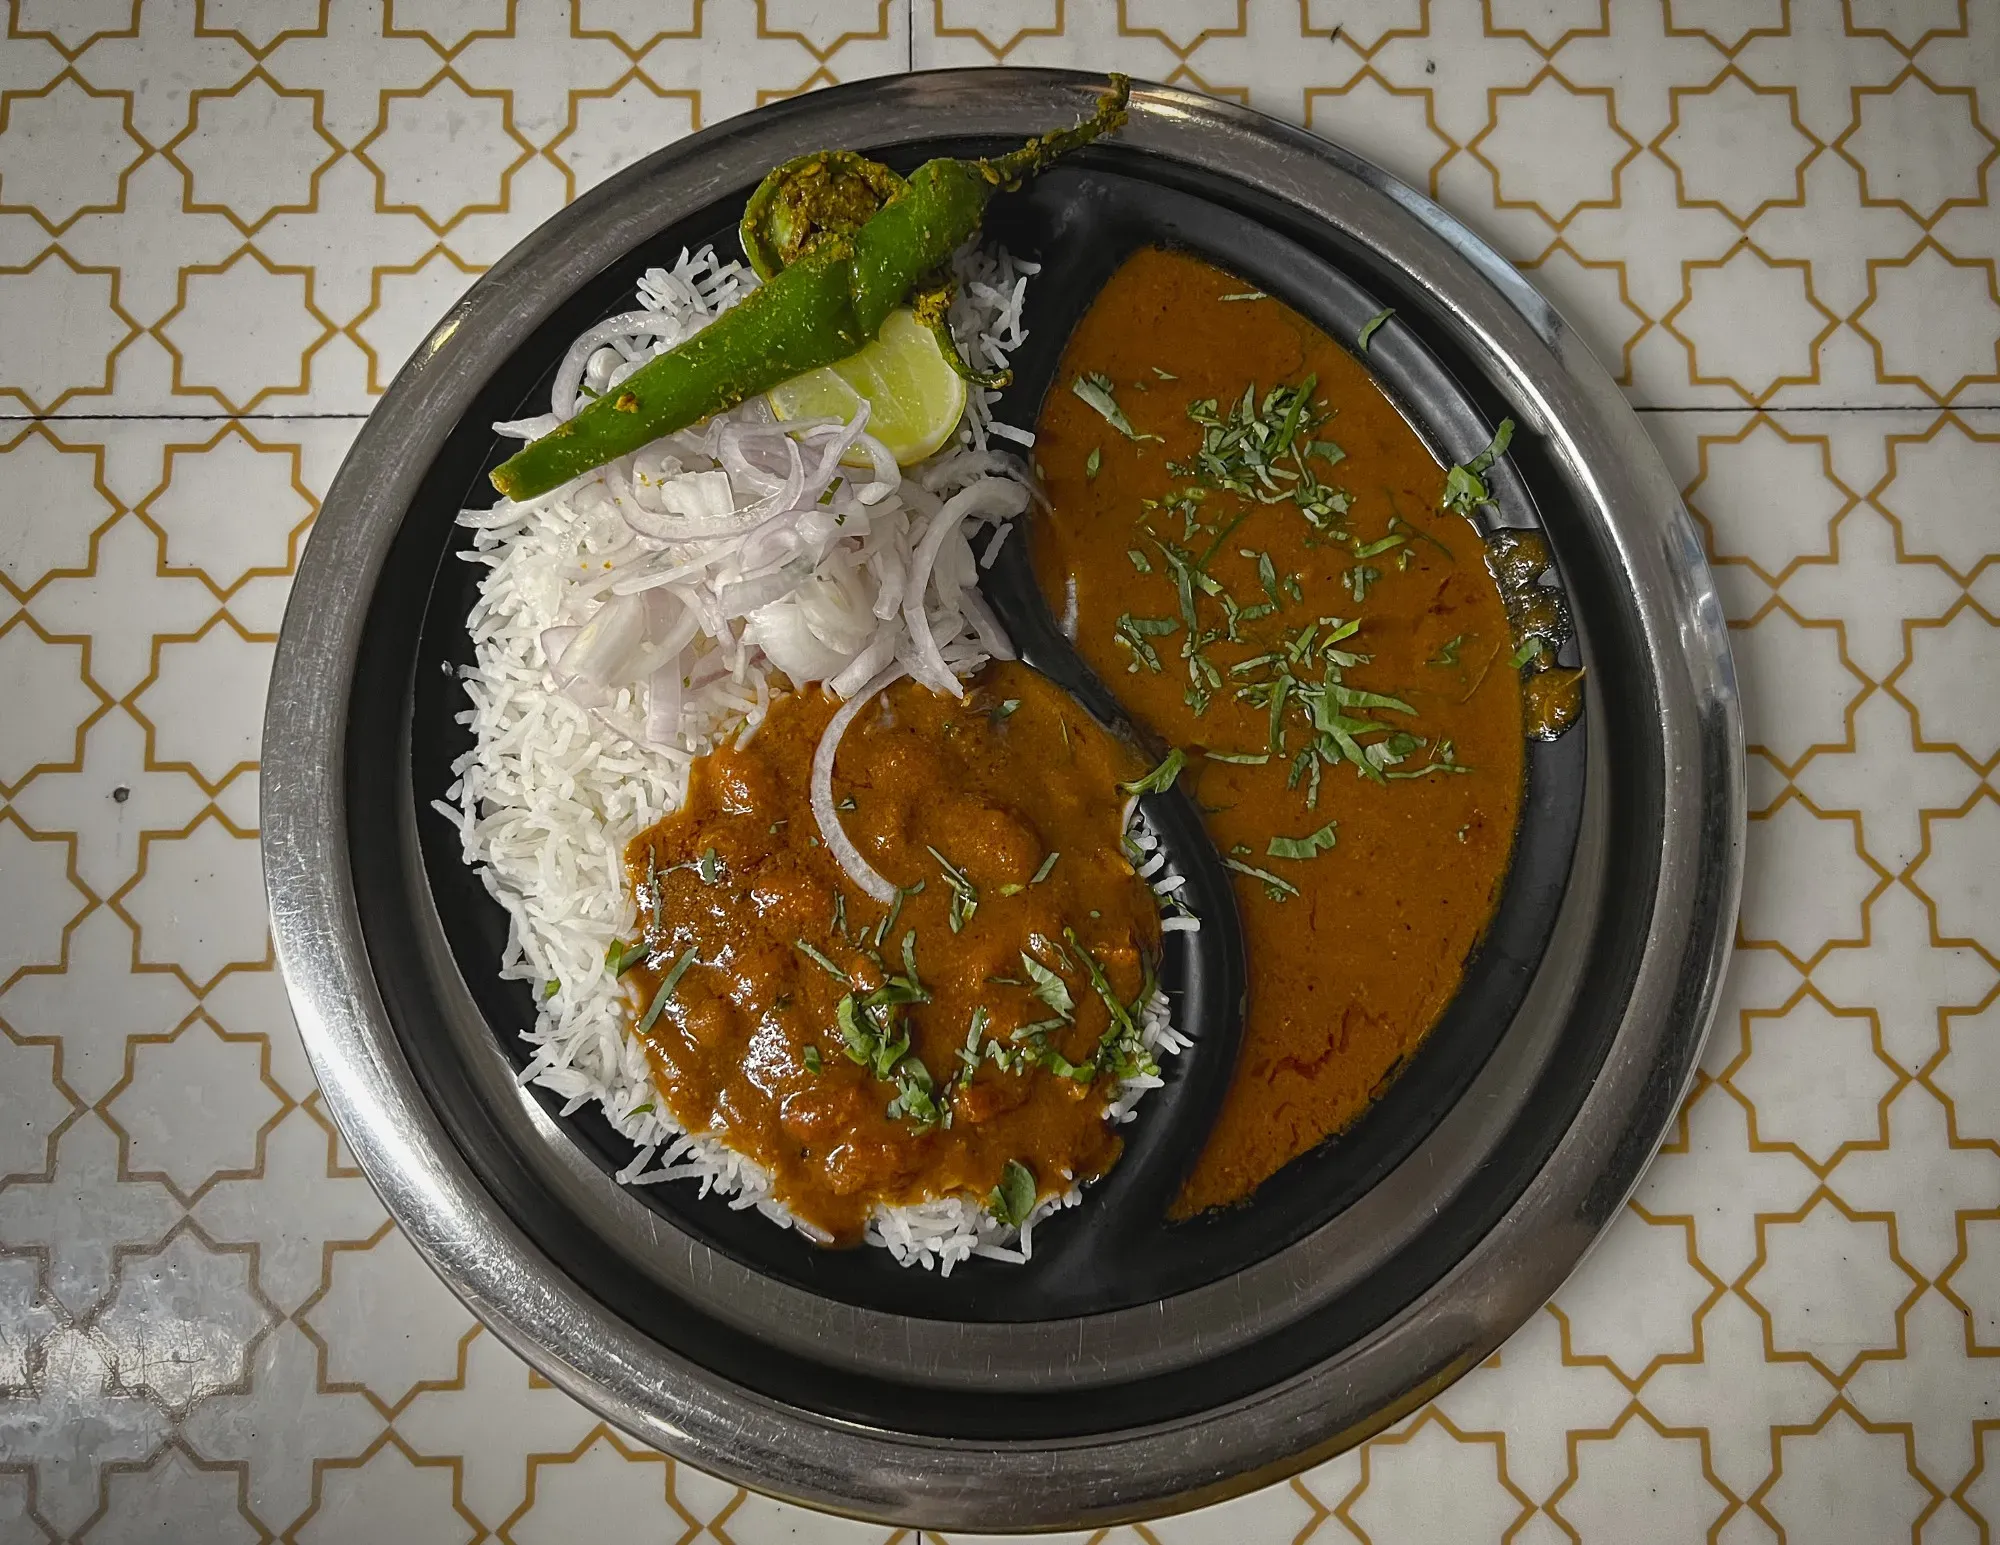 Overhead shot of a ying-and-yang shaped tray with Rajma Chawal on one side, and rice plus toppings on the other.